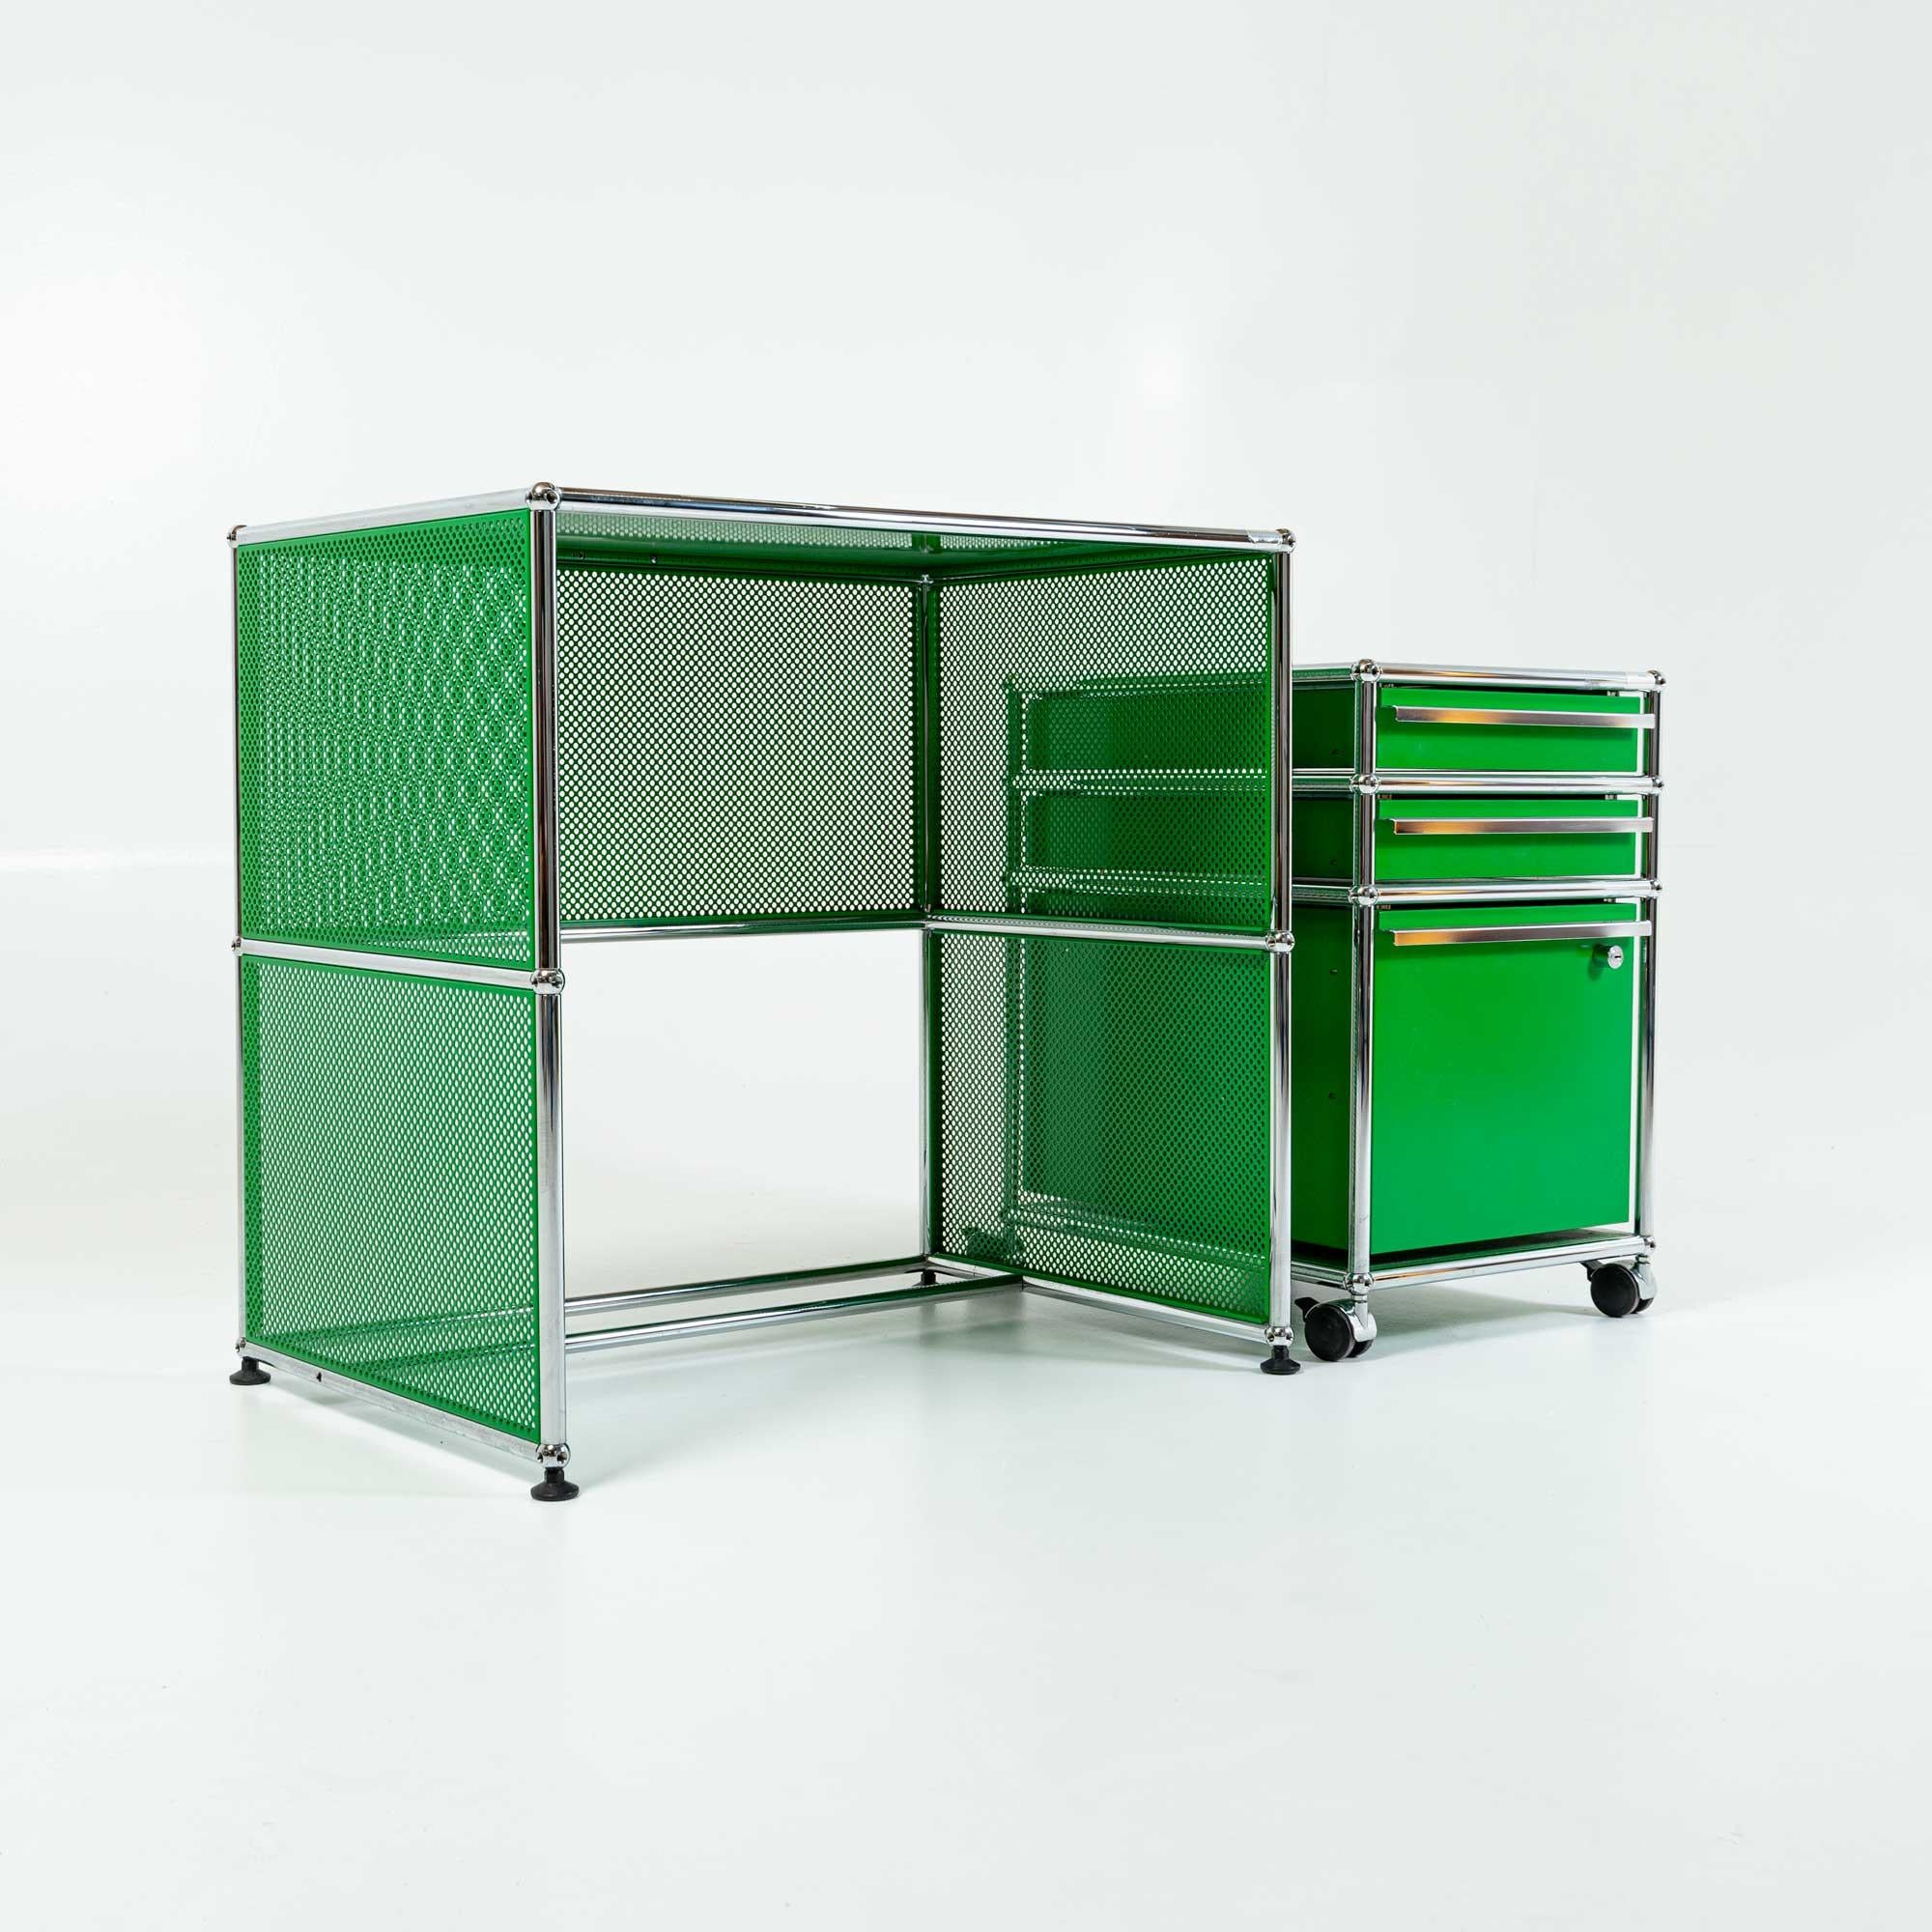 This is a playful USM green desk and rolling cabinet made by USM Haller in Switzerland, in overall good condition, some light wear on the surface. In overall good condition, ready to be used.

USM has been a Swiss family run business since 1885.